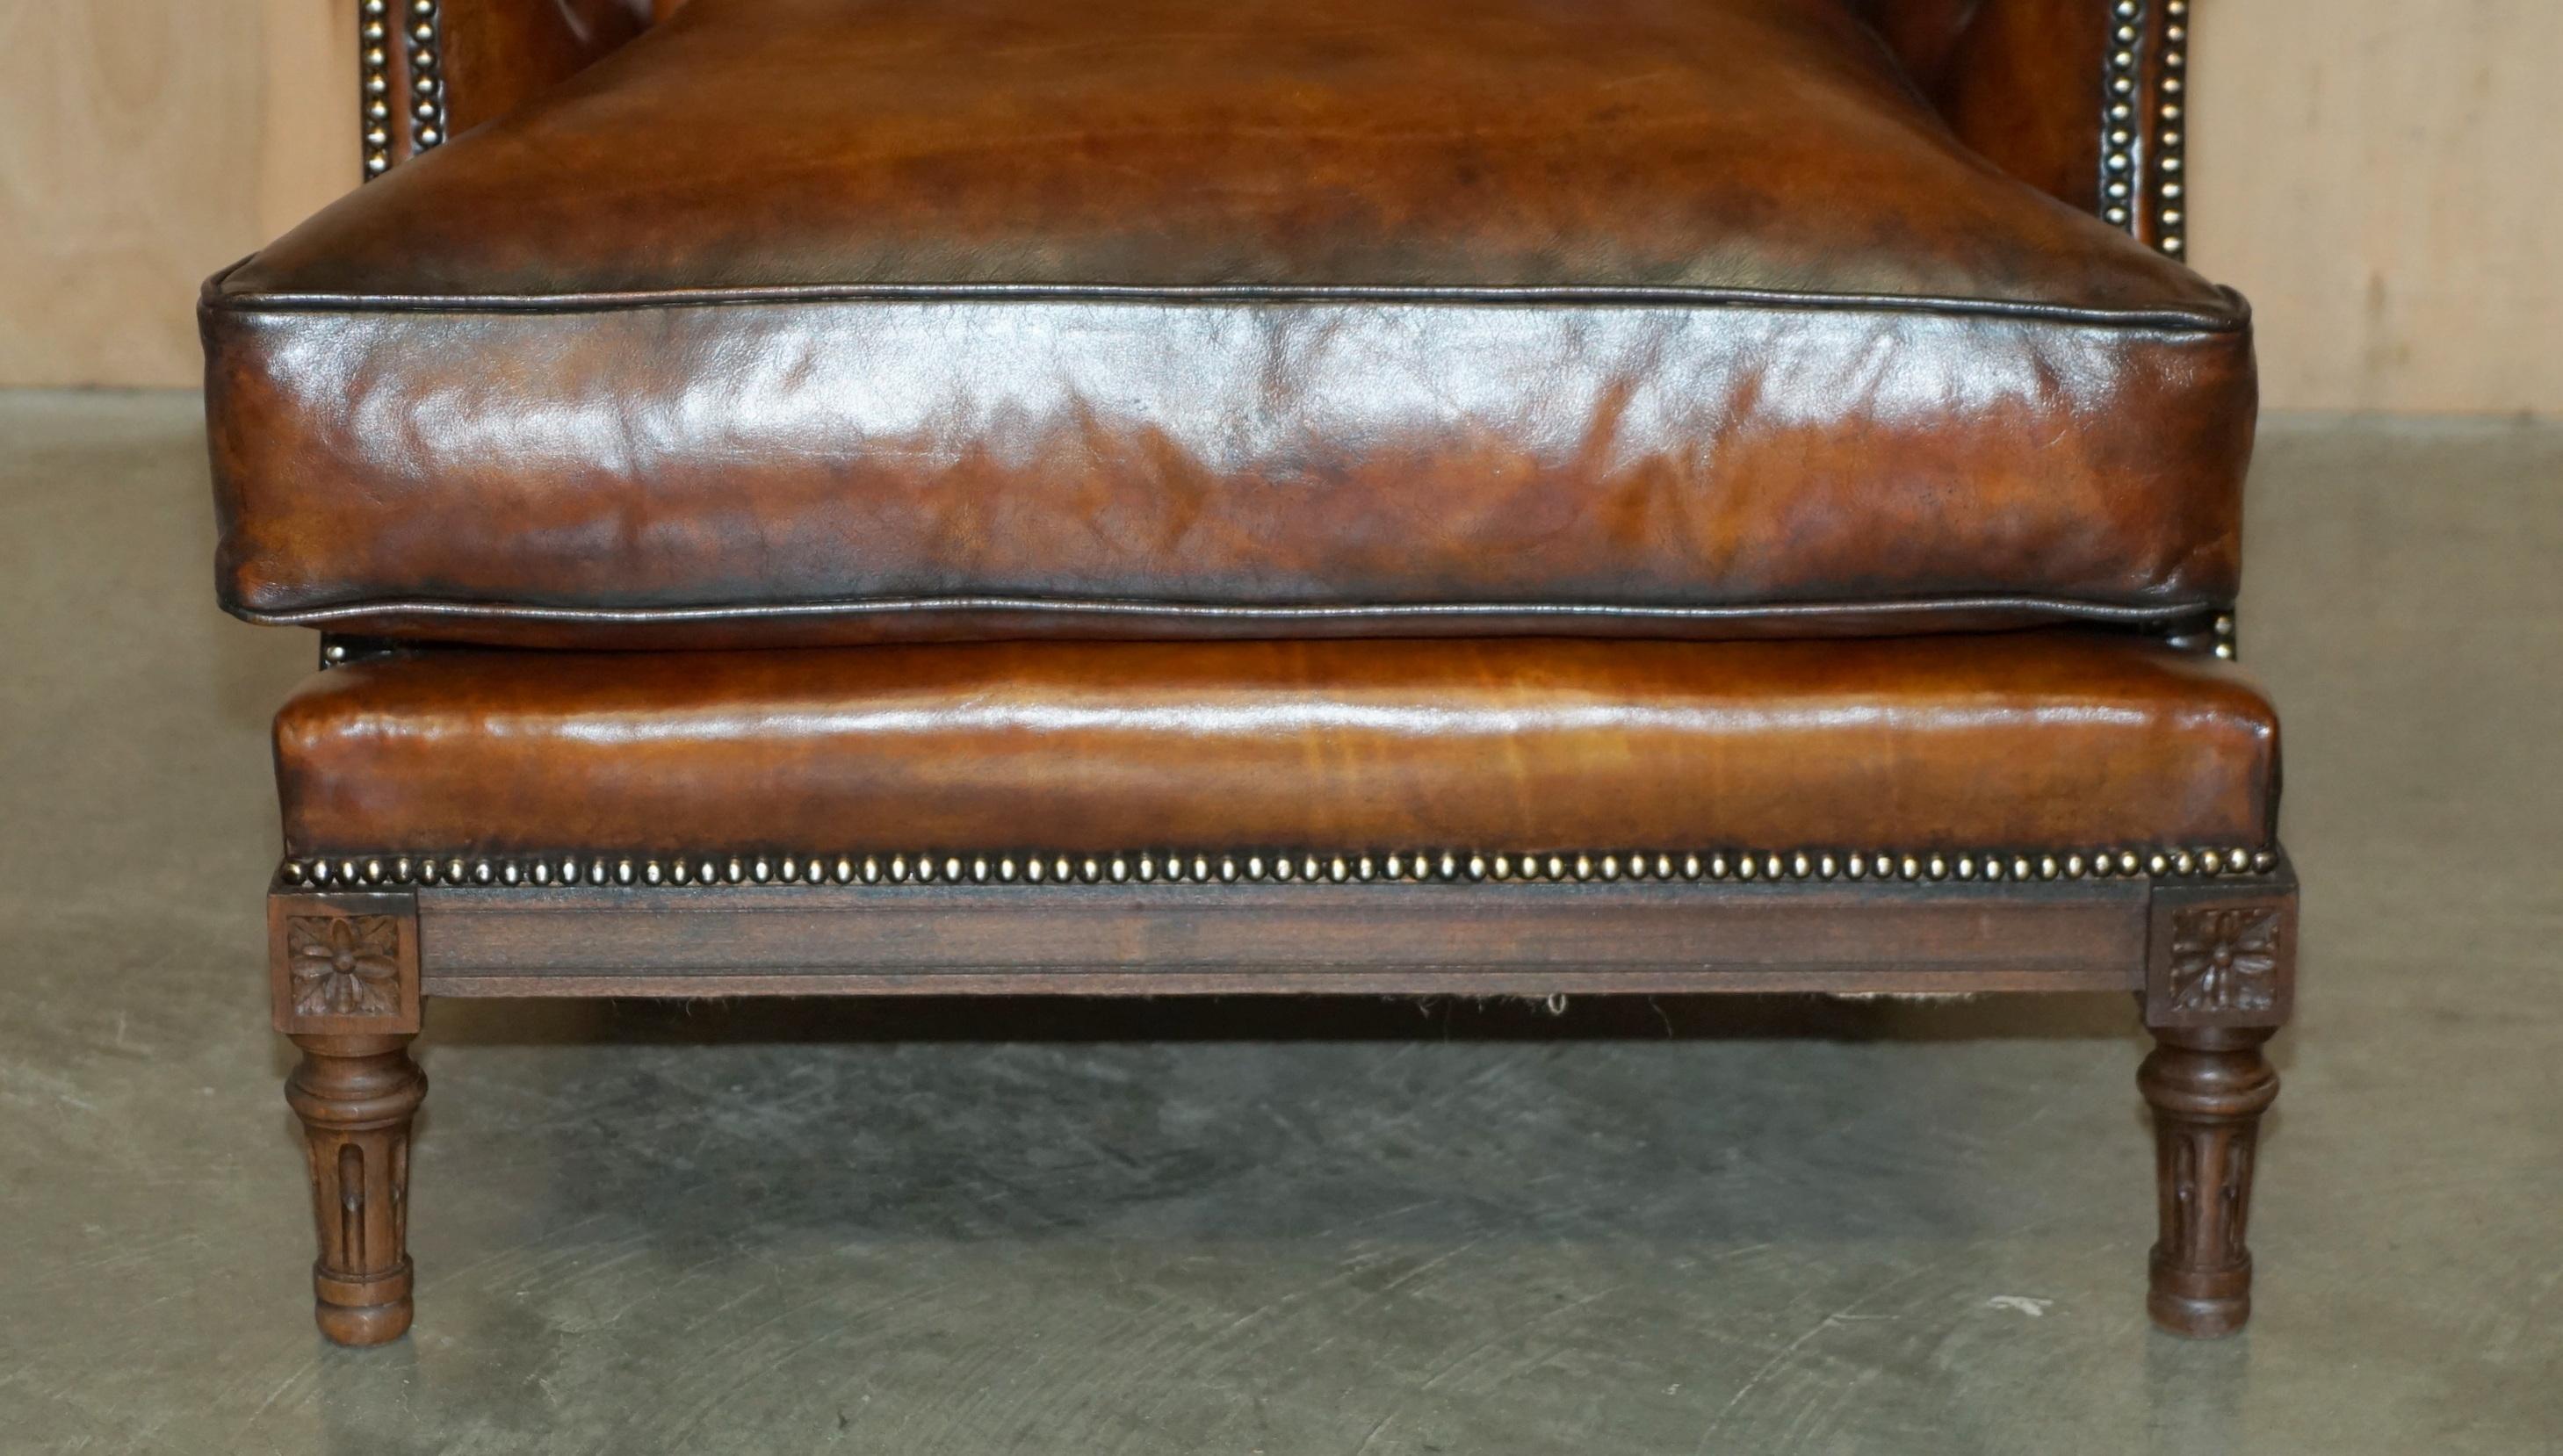 RESTORED CHESTERFIELD TUFTED HAND DYED BROWN LEATHER LIBRARY RECLINER ARMCHAiR im Angebot 2